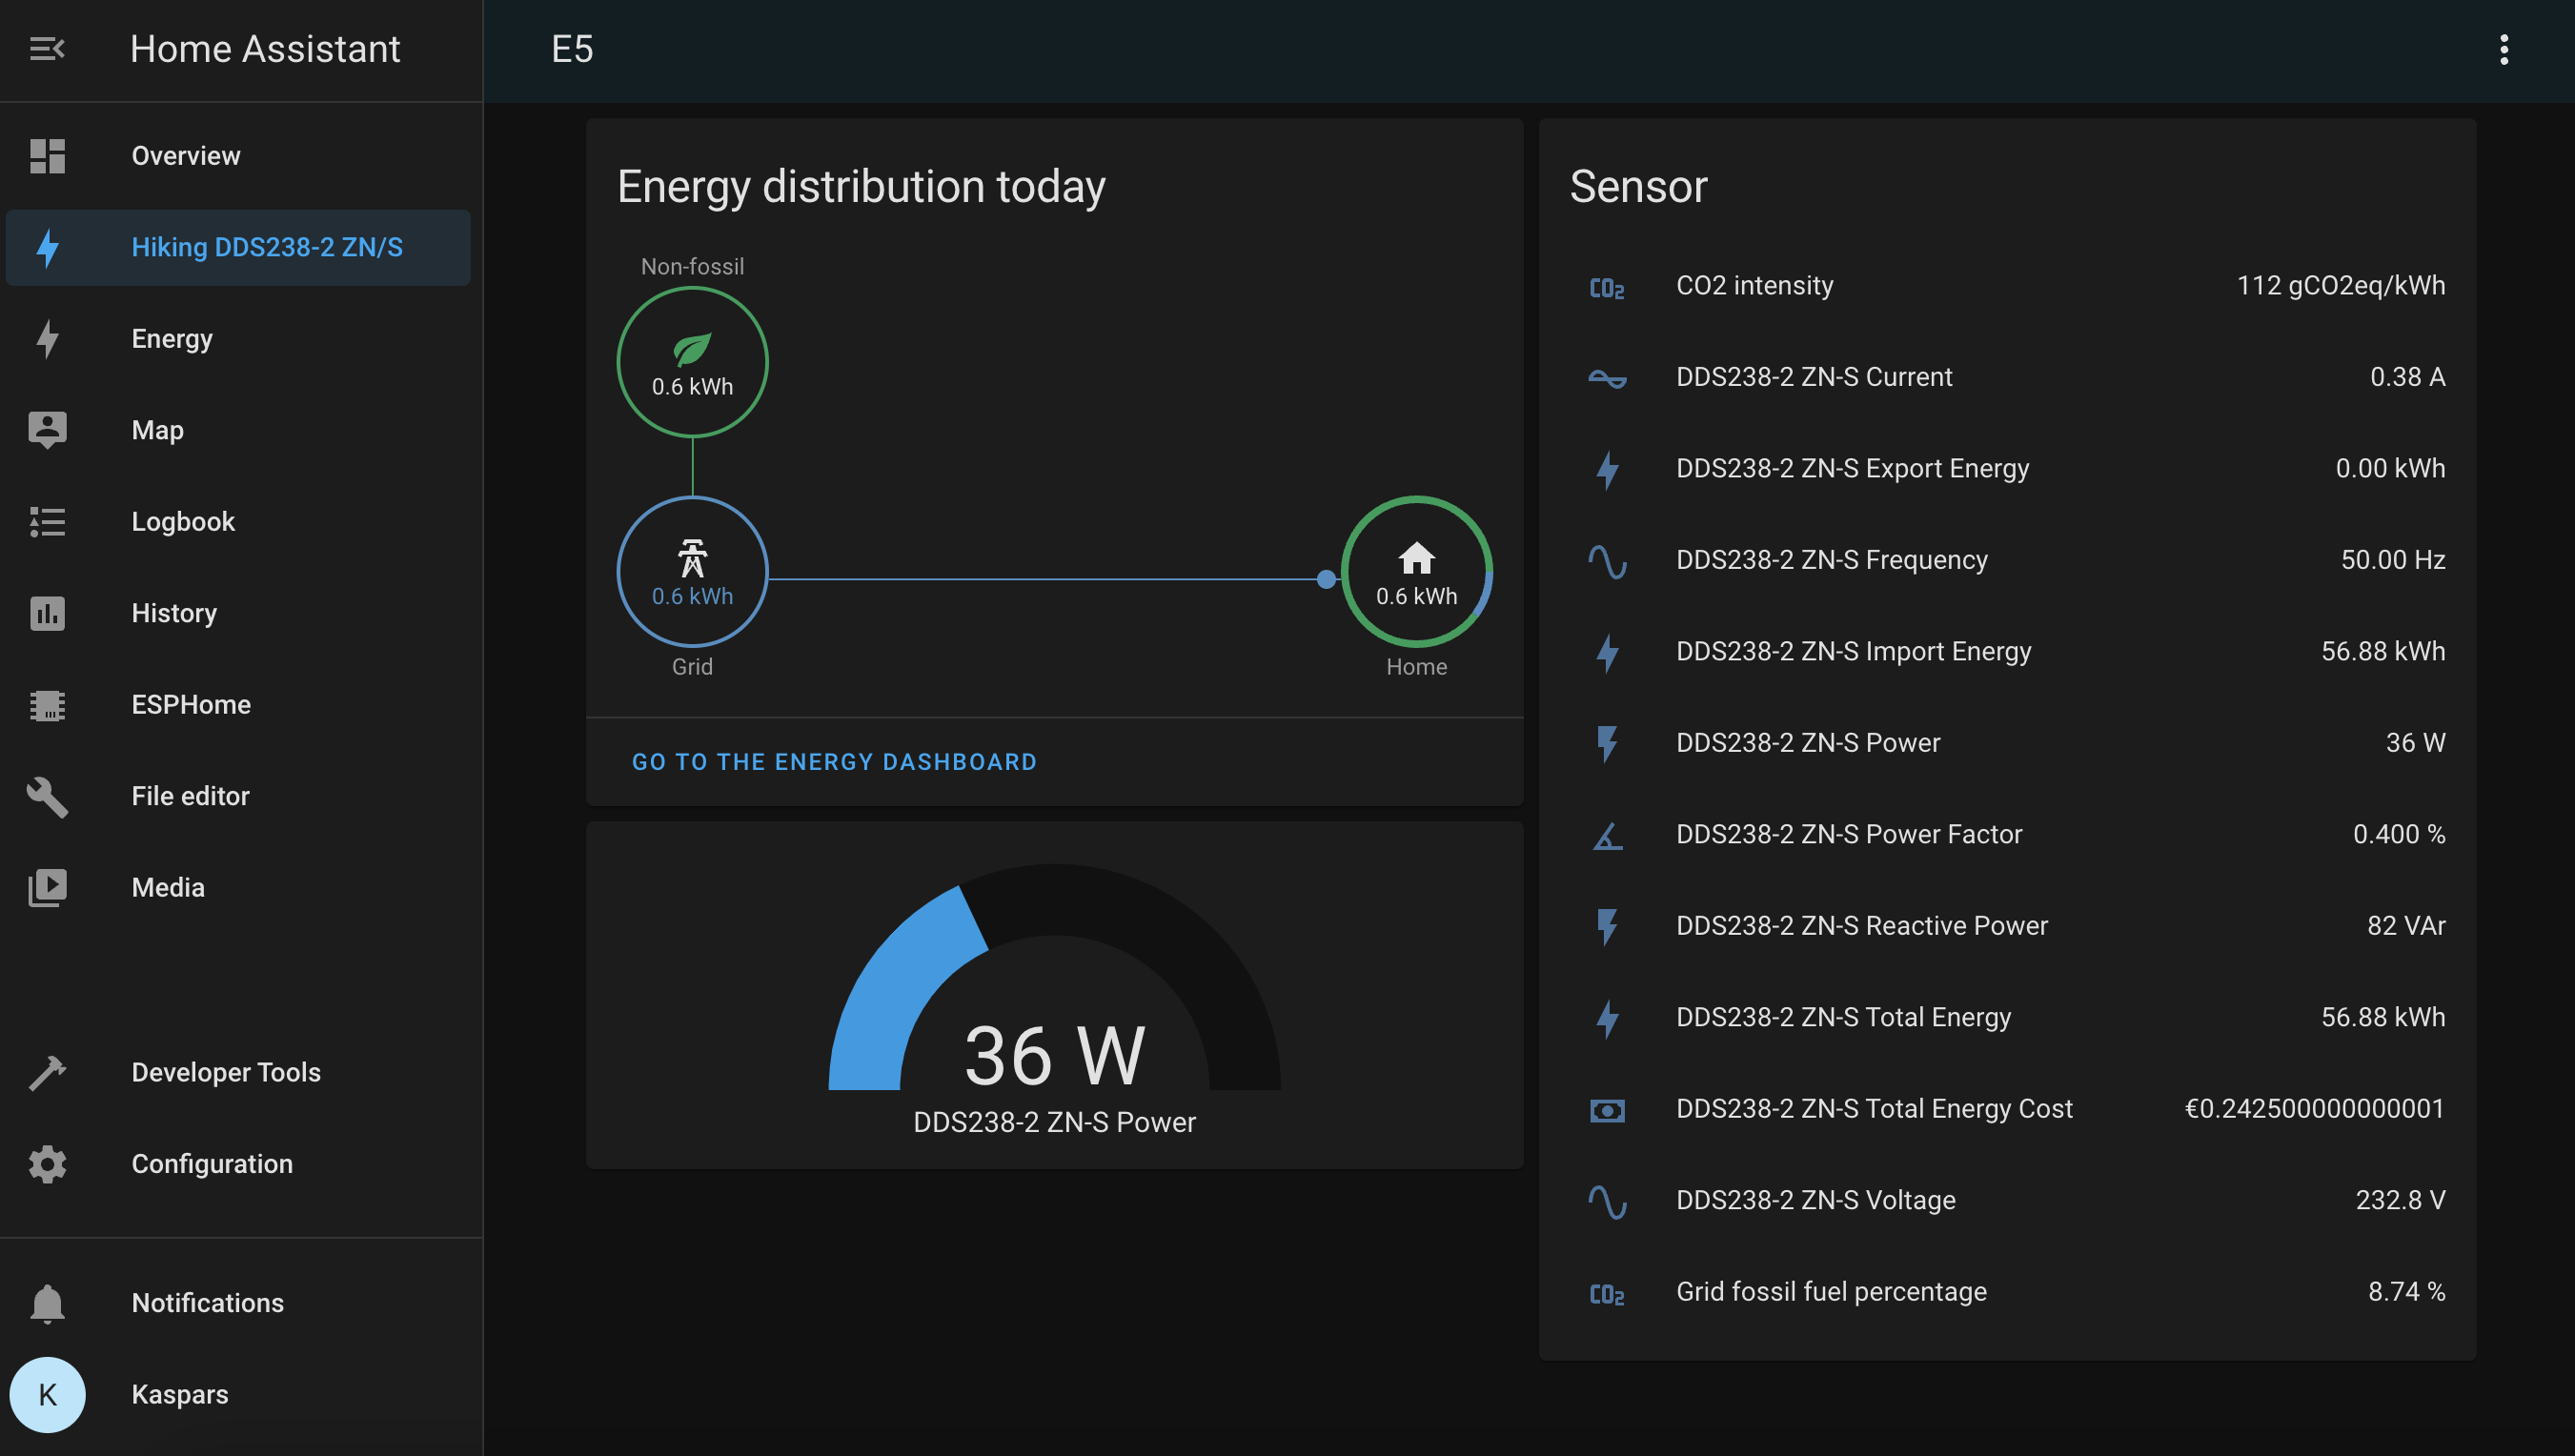 Home Assistant energy dashboard using Hiking DDS238-2 energy meter